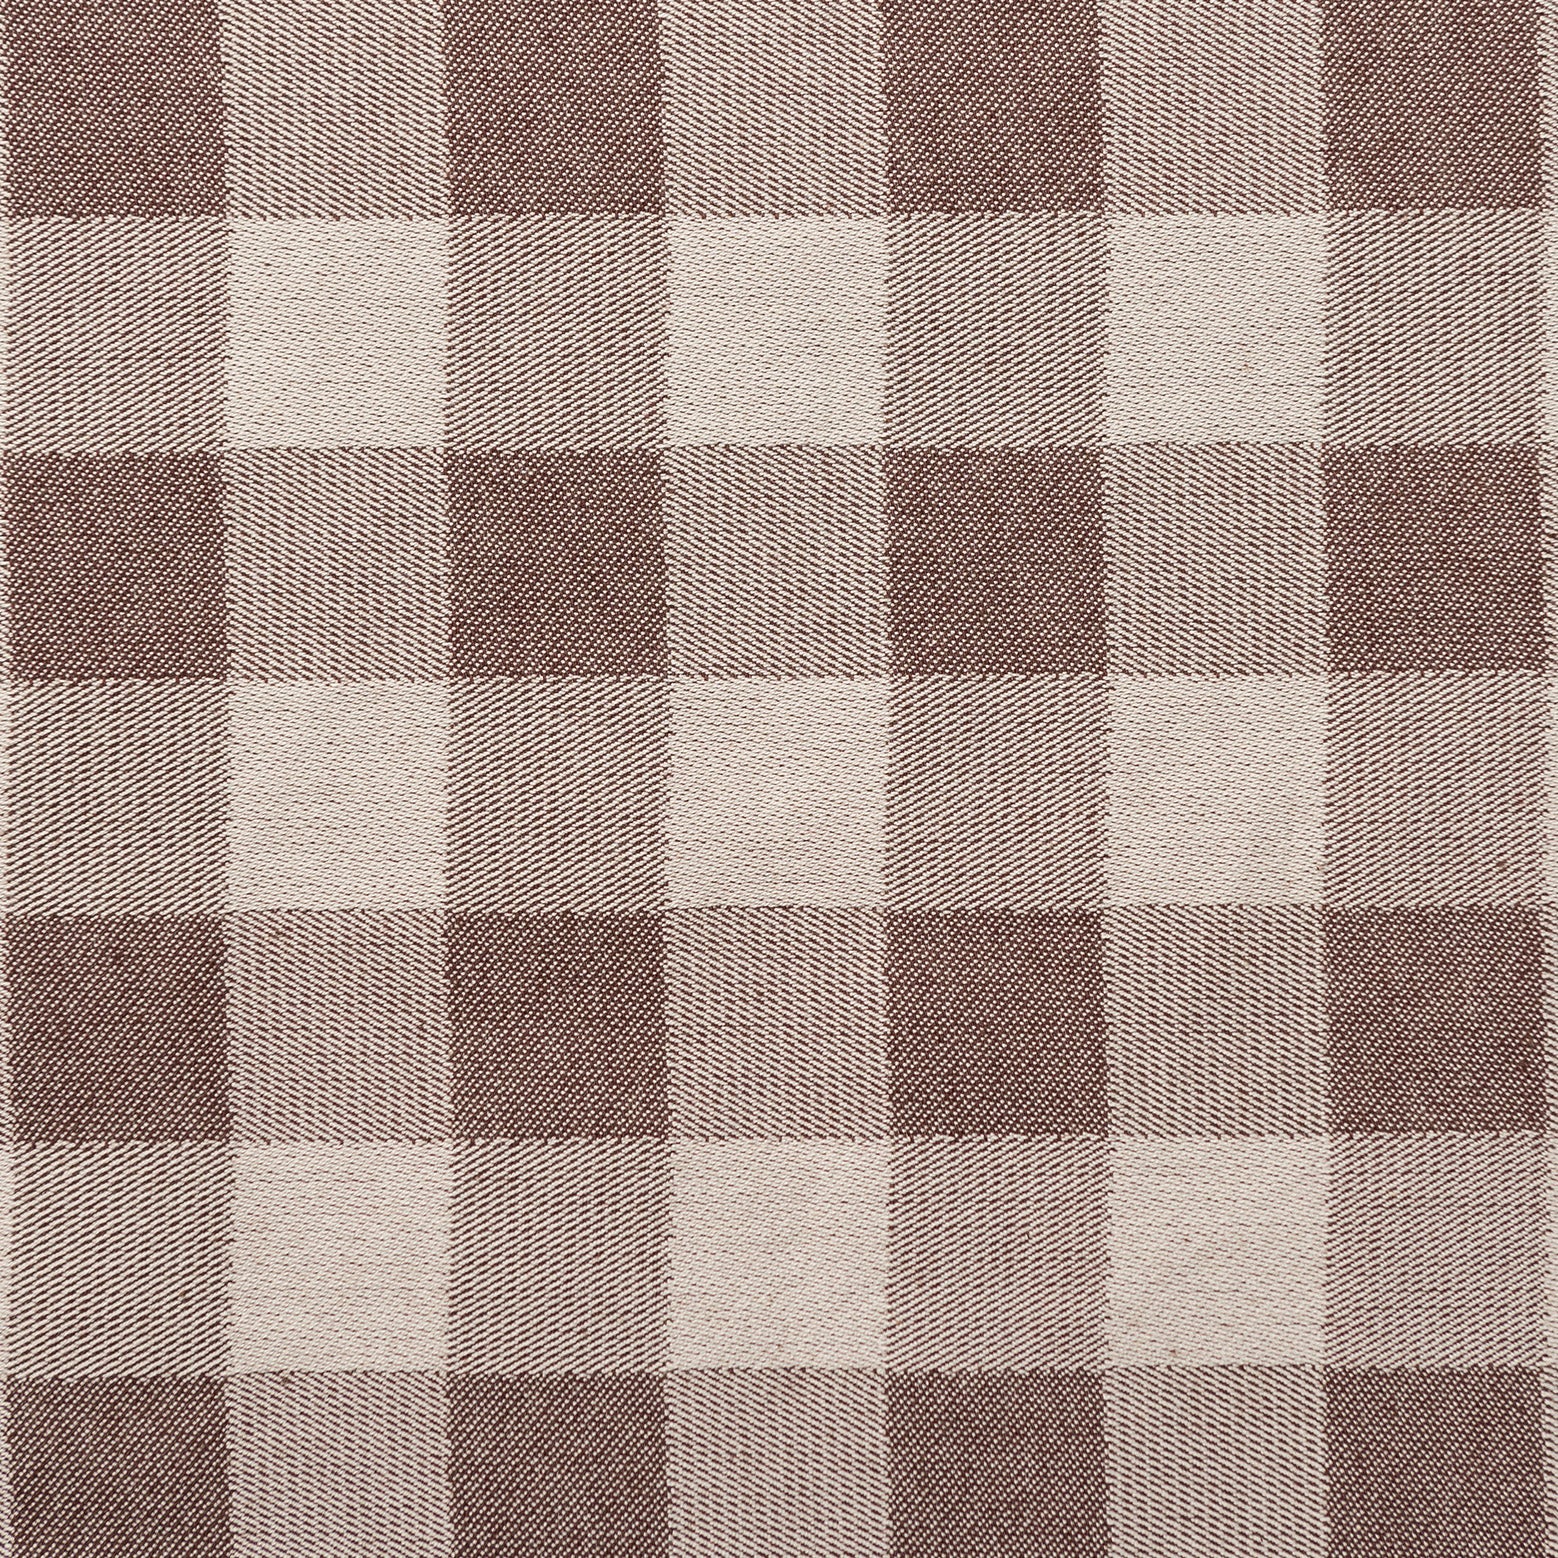 Woodhouse Check Cotton Fabric Chestnut sample